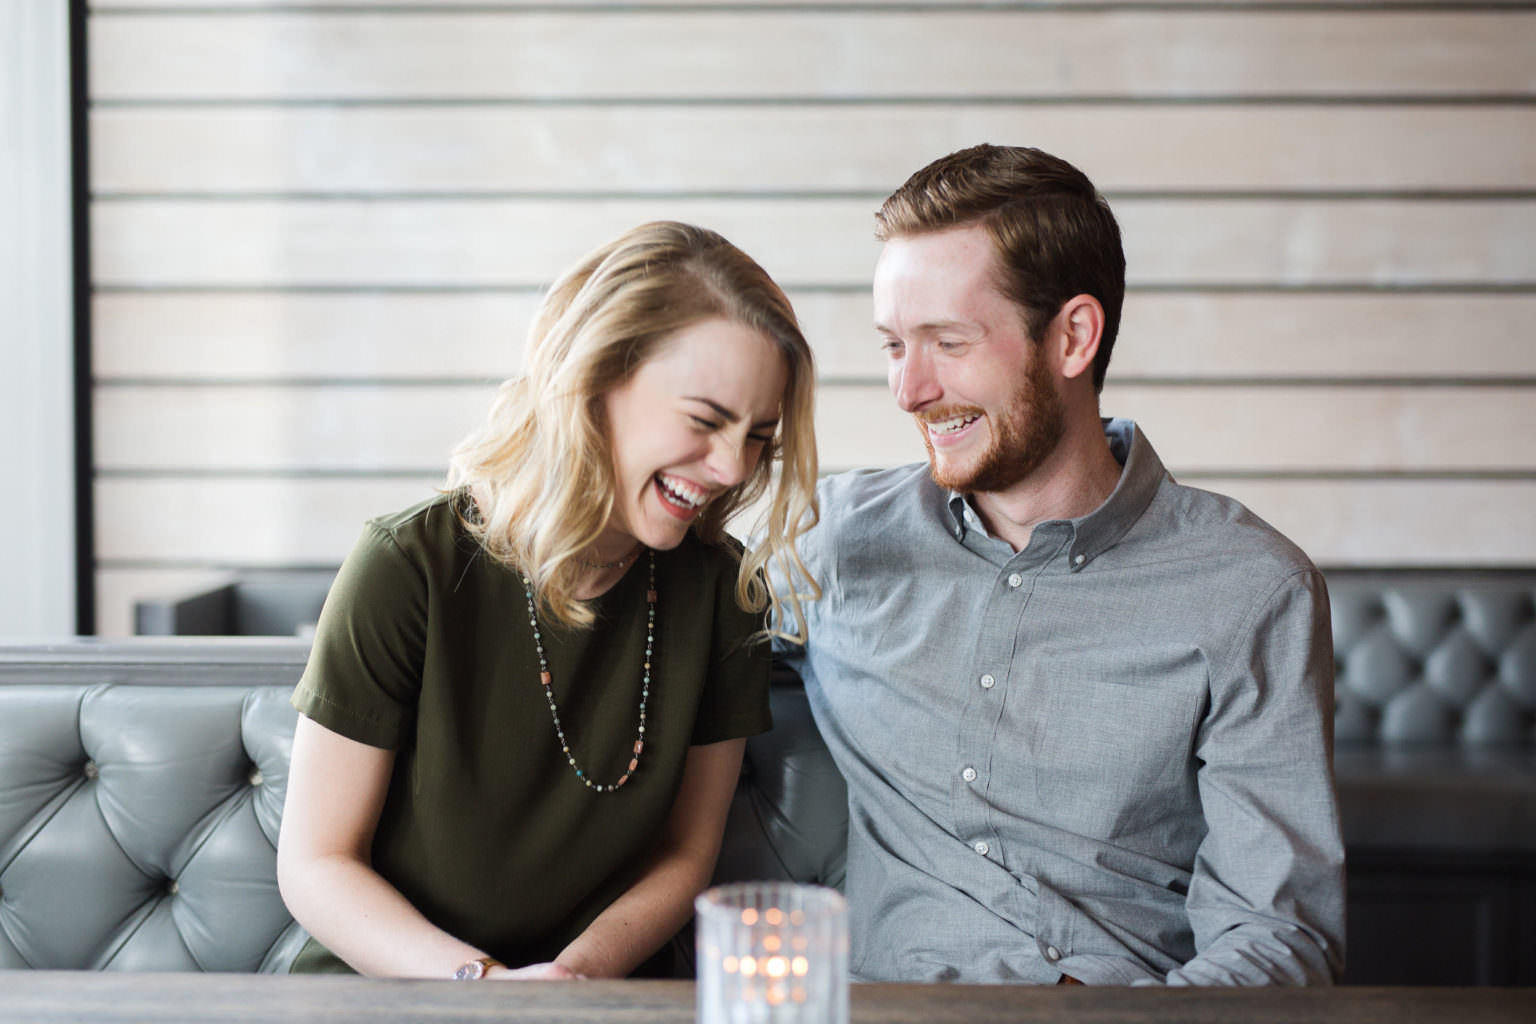 We are coming to you with 3 steps to a stay-at-home date night that will help you reconnect and hopefully give you a few laughs. Also check out our 2 free resources to keep you entertained! #datenightin #couplegoals #datenightideas